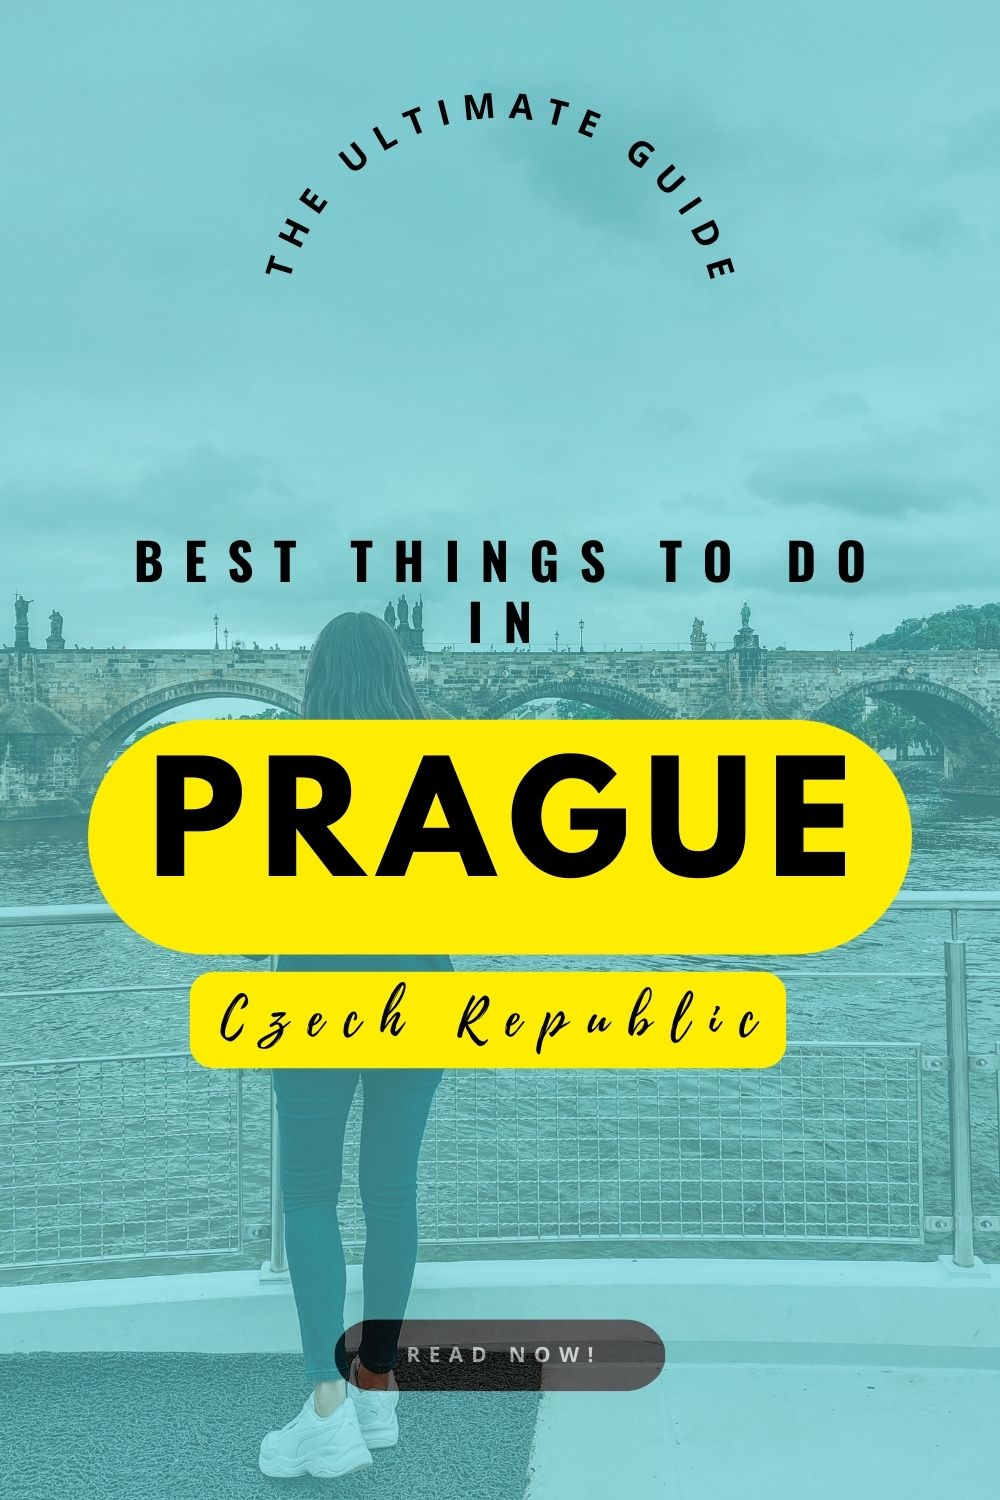 Thinking about visiting Prague? Here's a quick rundown of the top things you can't miss in the Czech capital: wandering through the historic streets of Praha, crossing the iconic Charles Bridge, exploring Prague Castle, checking out some cool museums like the National Gallery, tasting delicious Czech cuisine, and cruising along the Vltava River for stunning city views. Trust me, it's an adventure you won't forget! 
